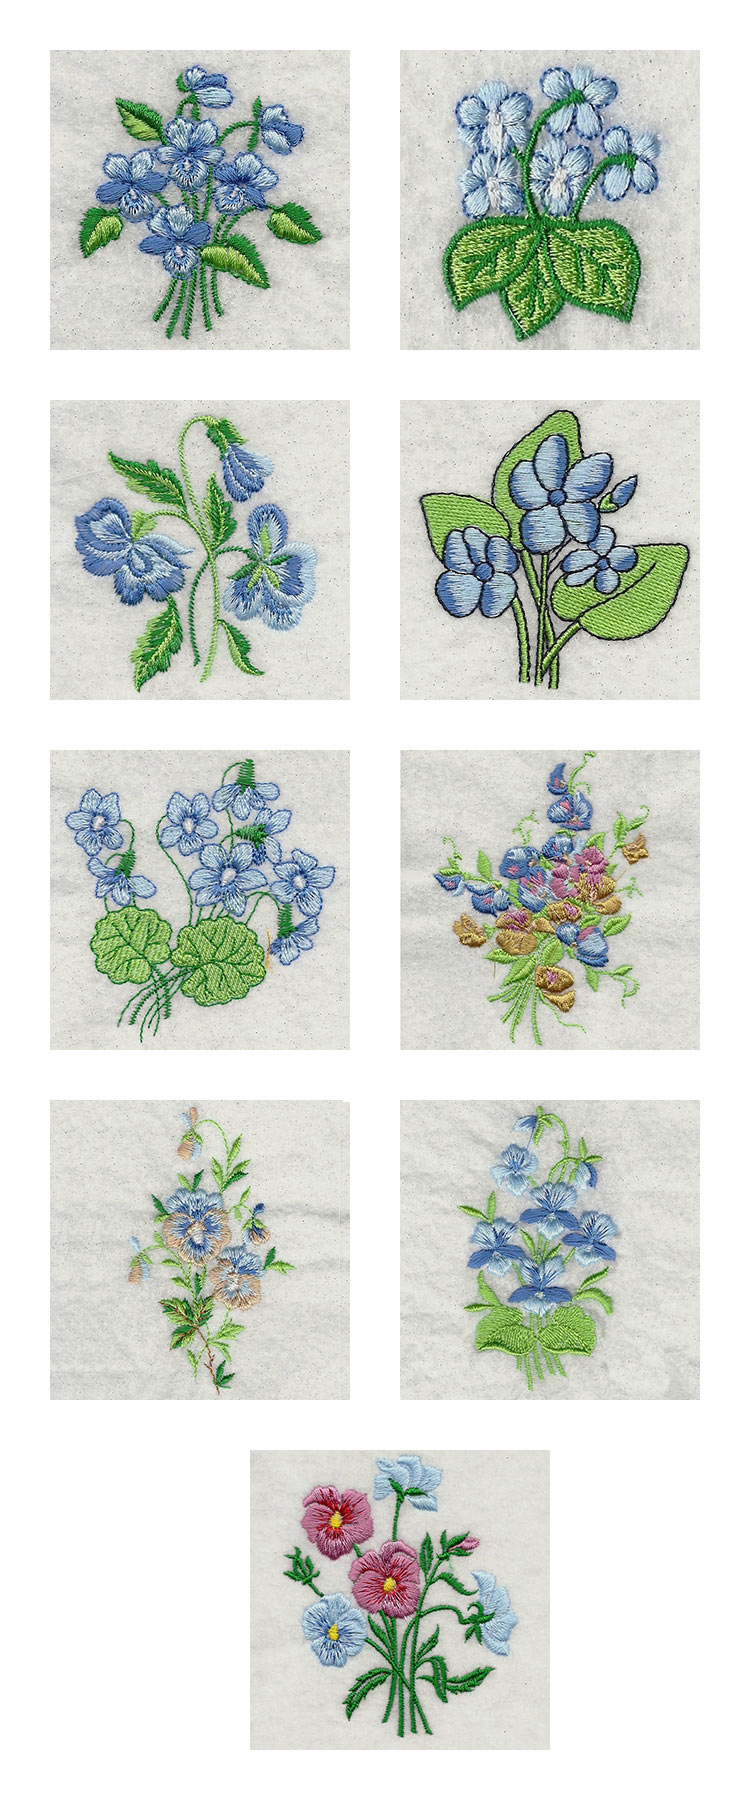 Pansies and Violets 1 Embroidery Machine Design Details